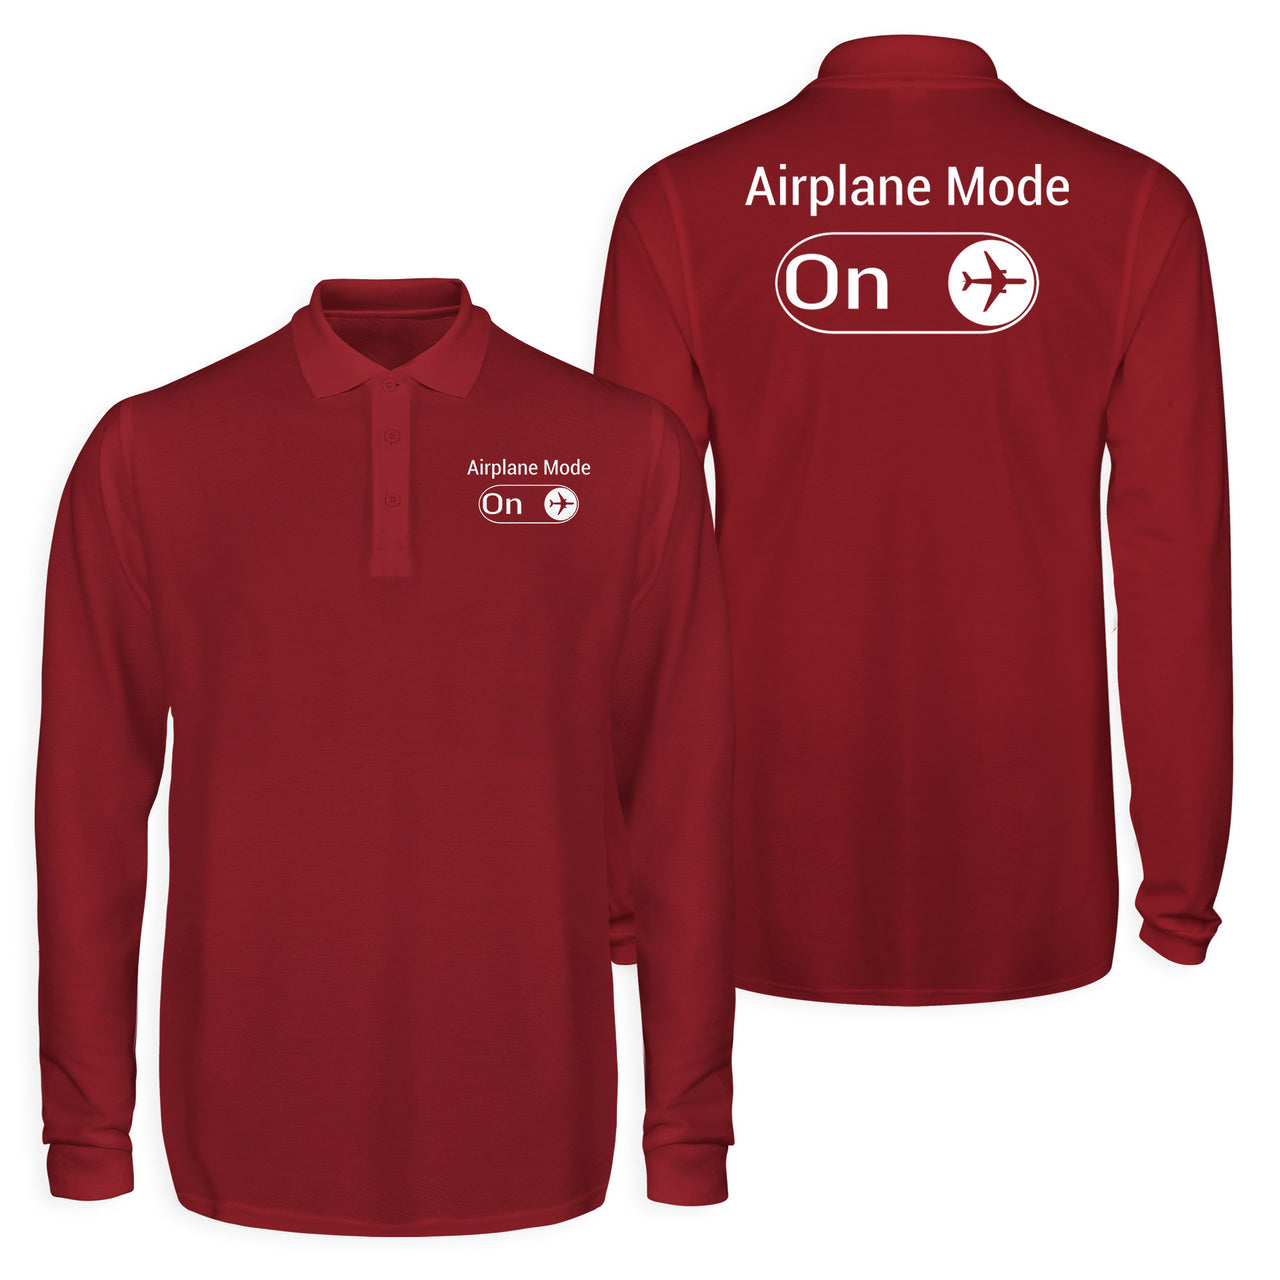 Airplane Mode On Designed Long Sleeve Polo T-Shirts (Double-Side)